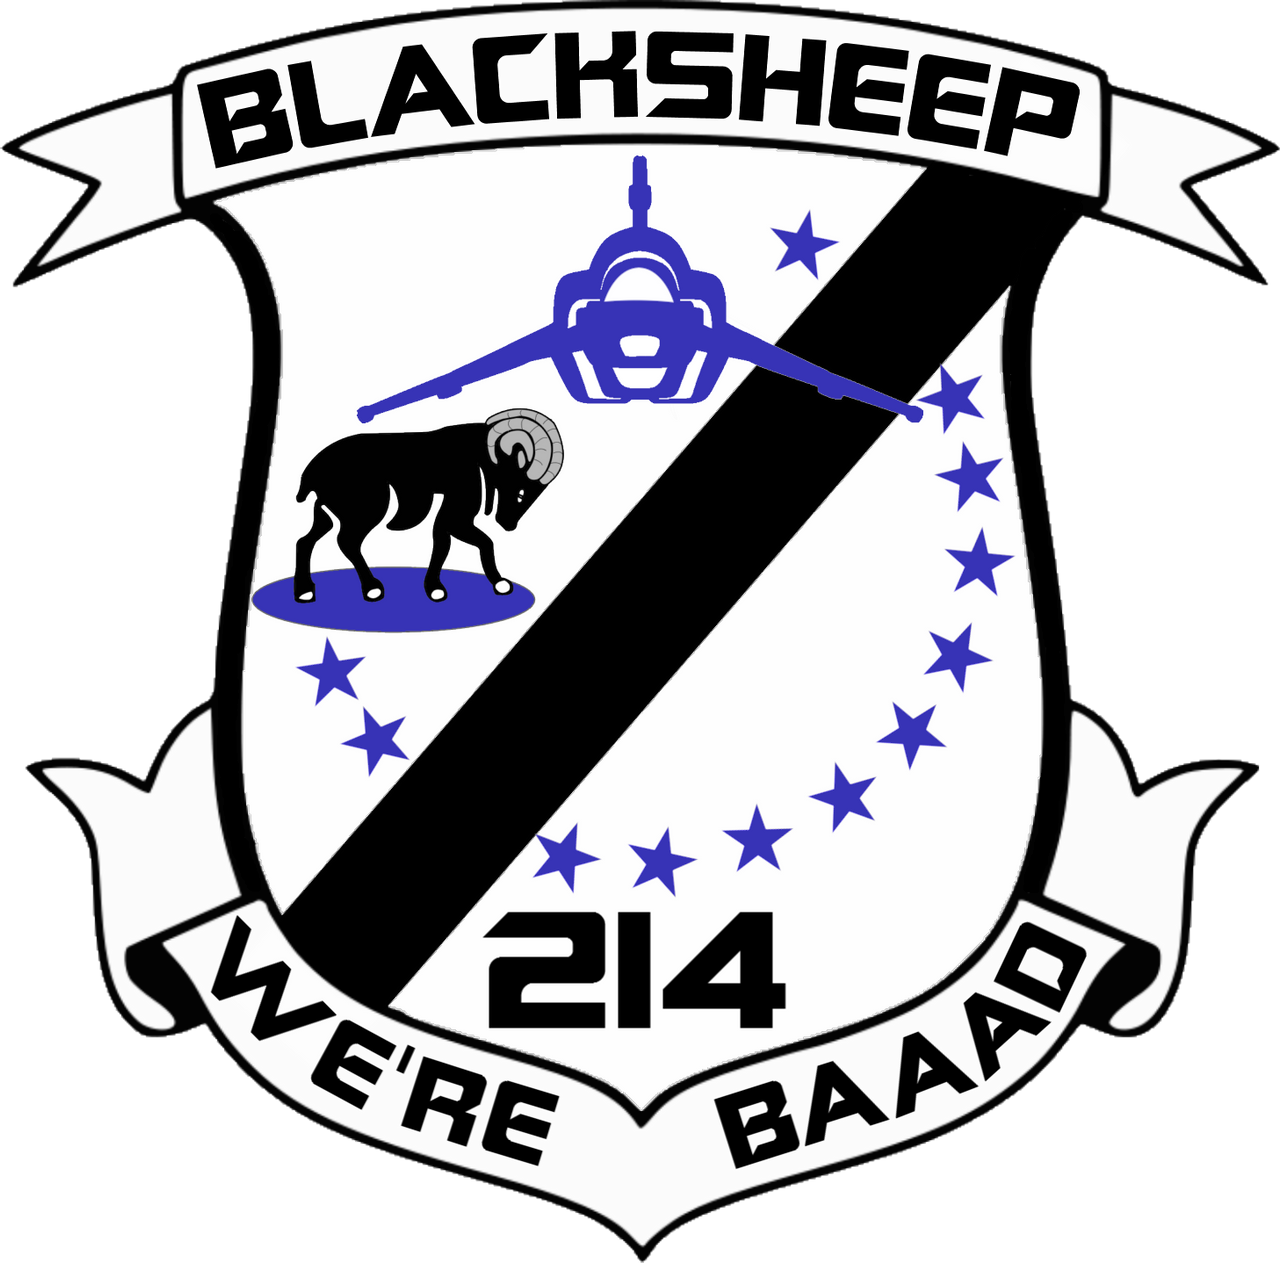 bsg_vfs_214_blaksheep_squadron_insignia_by_viperaviator-d6ty1ce.png